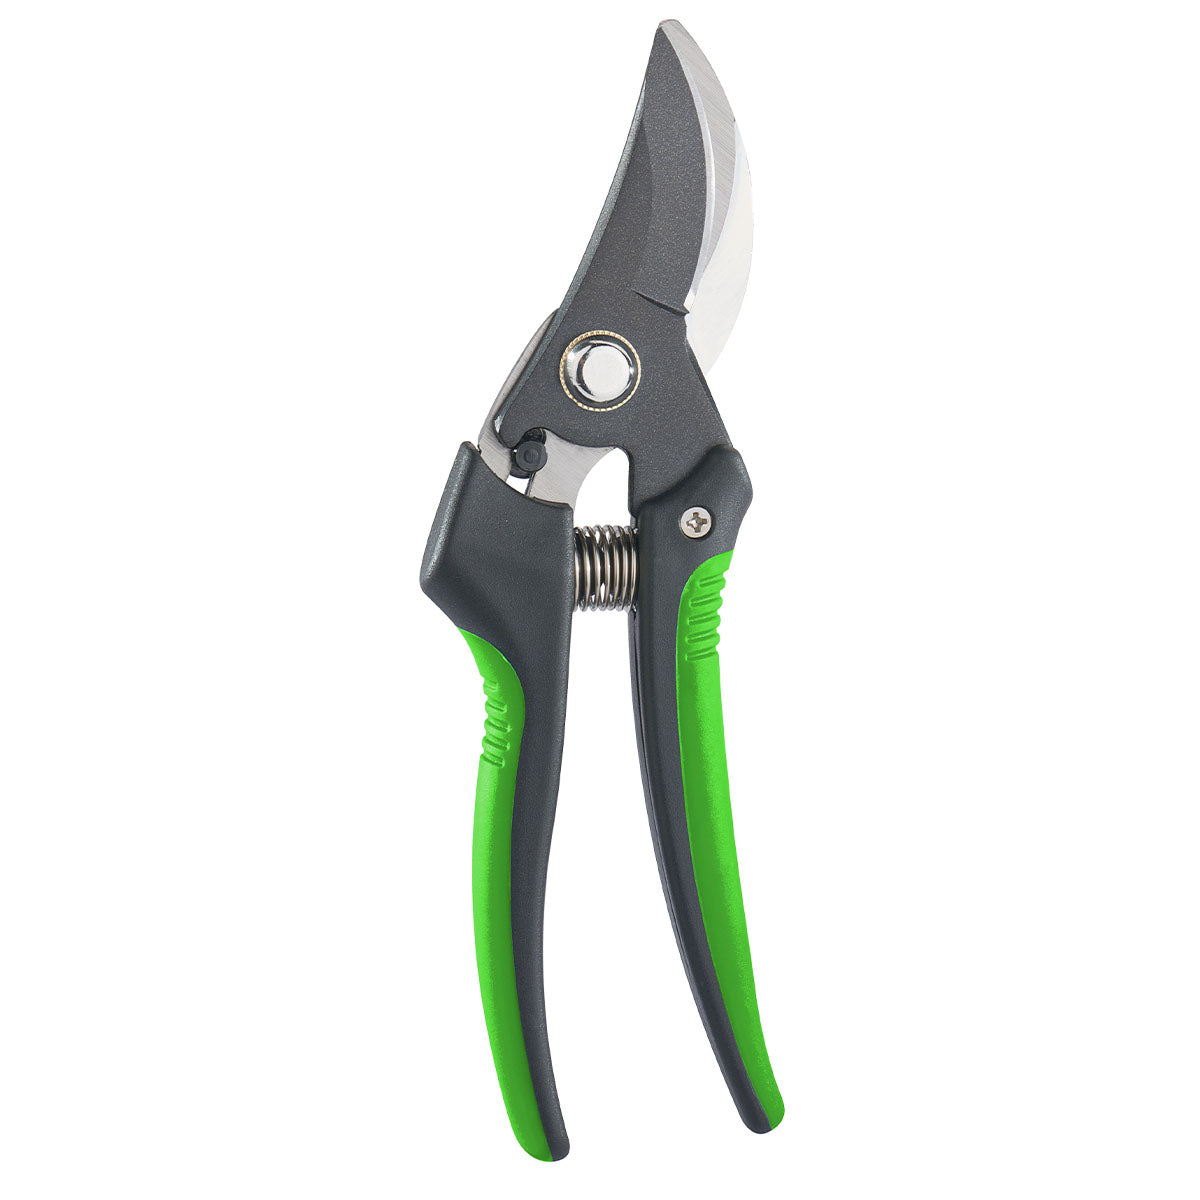 Premium Pruning Secateurs Shears,Sharp Hard Branches Pruners,Garden Plant Hedges 